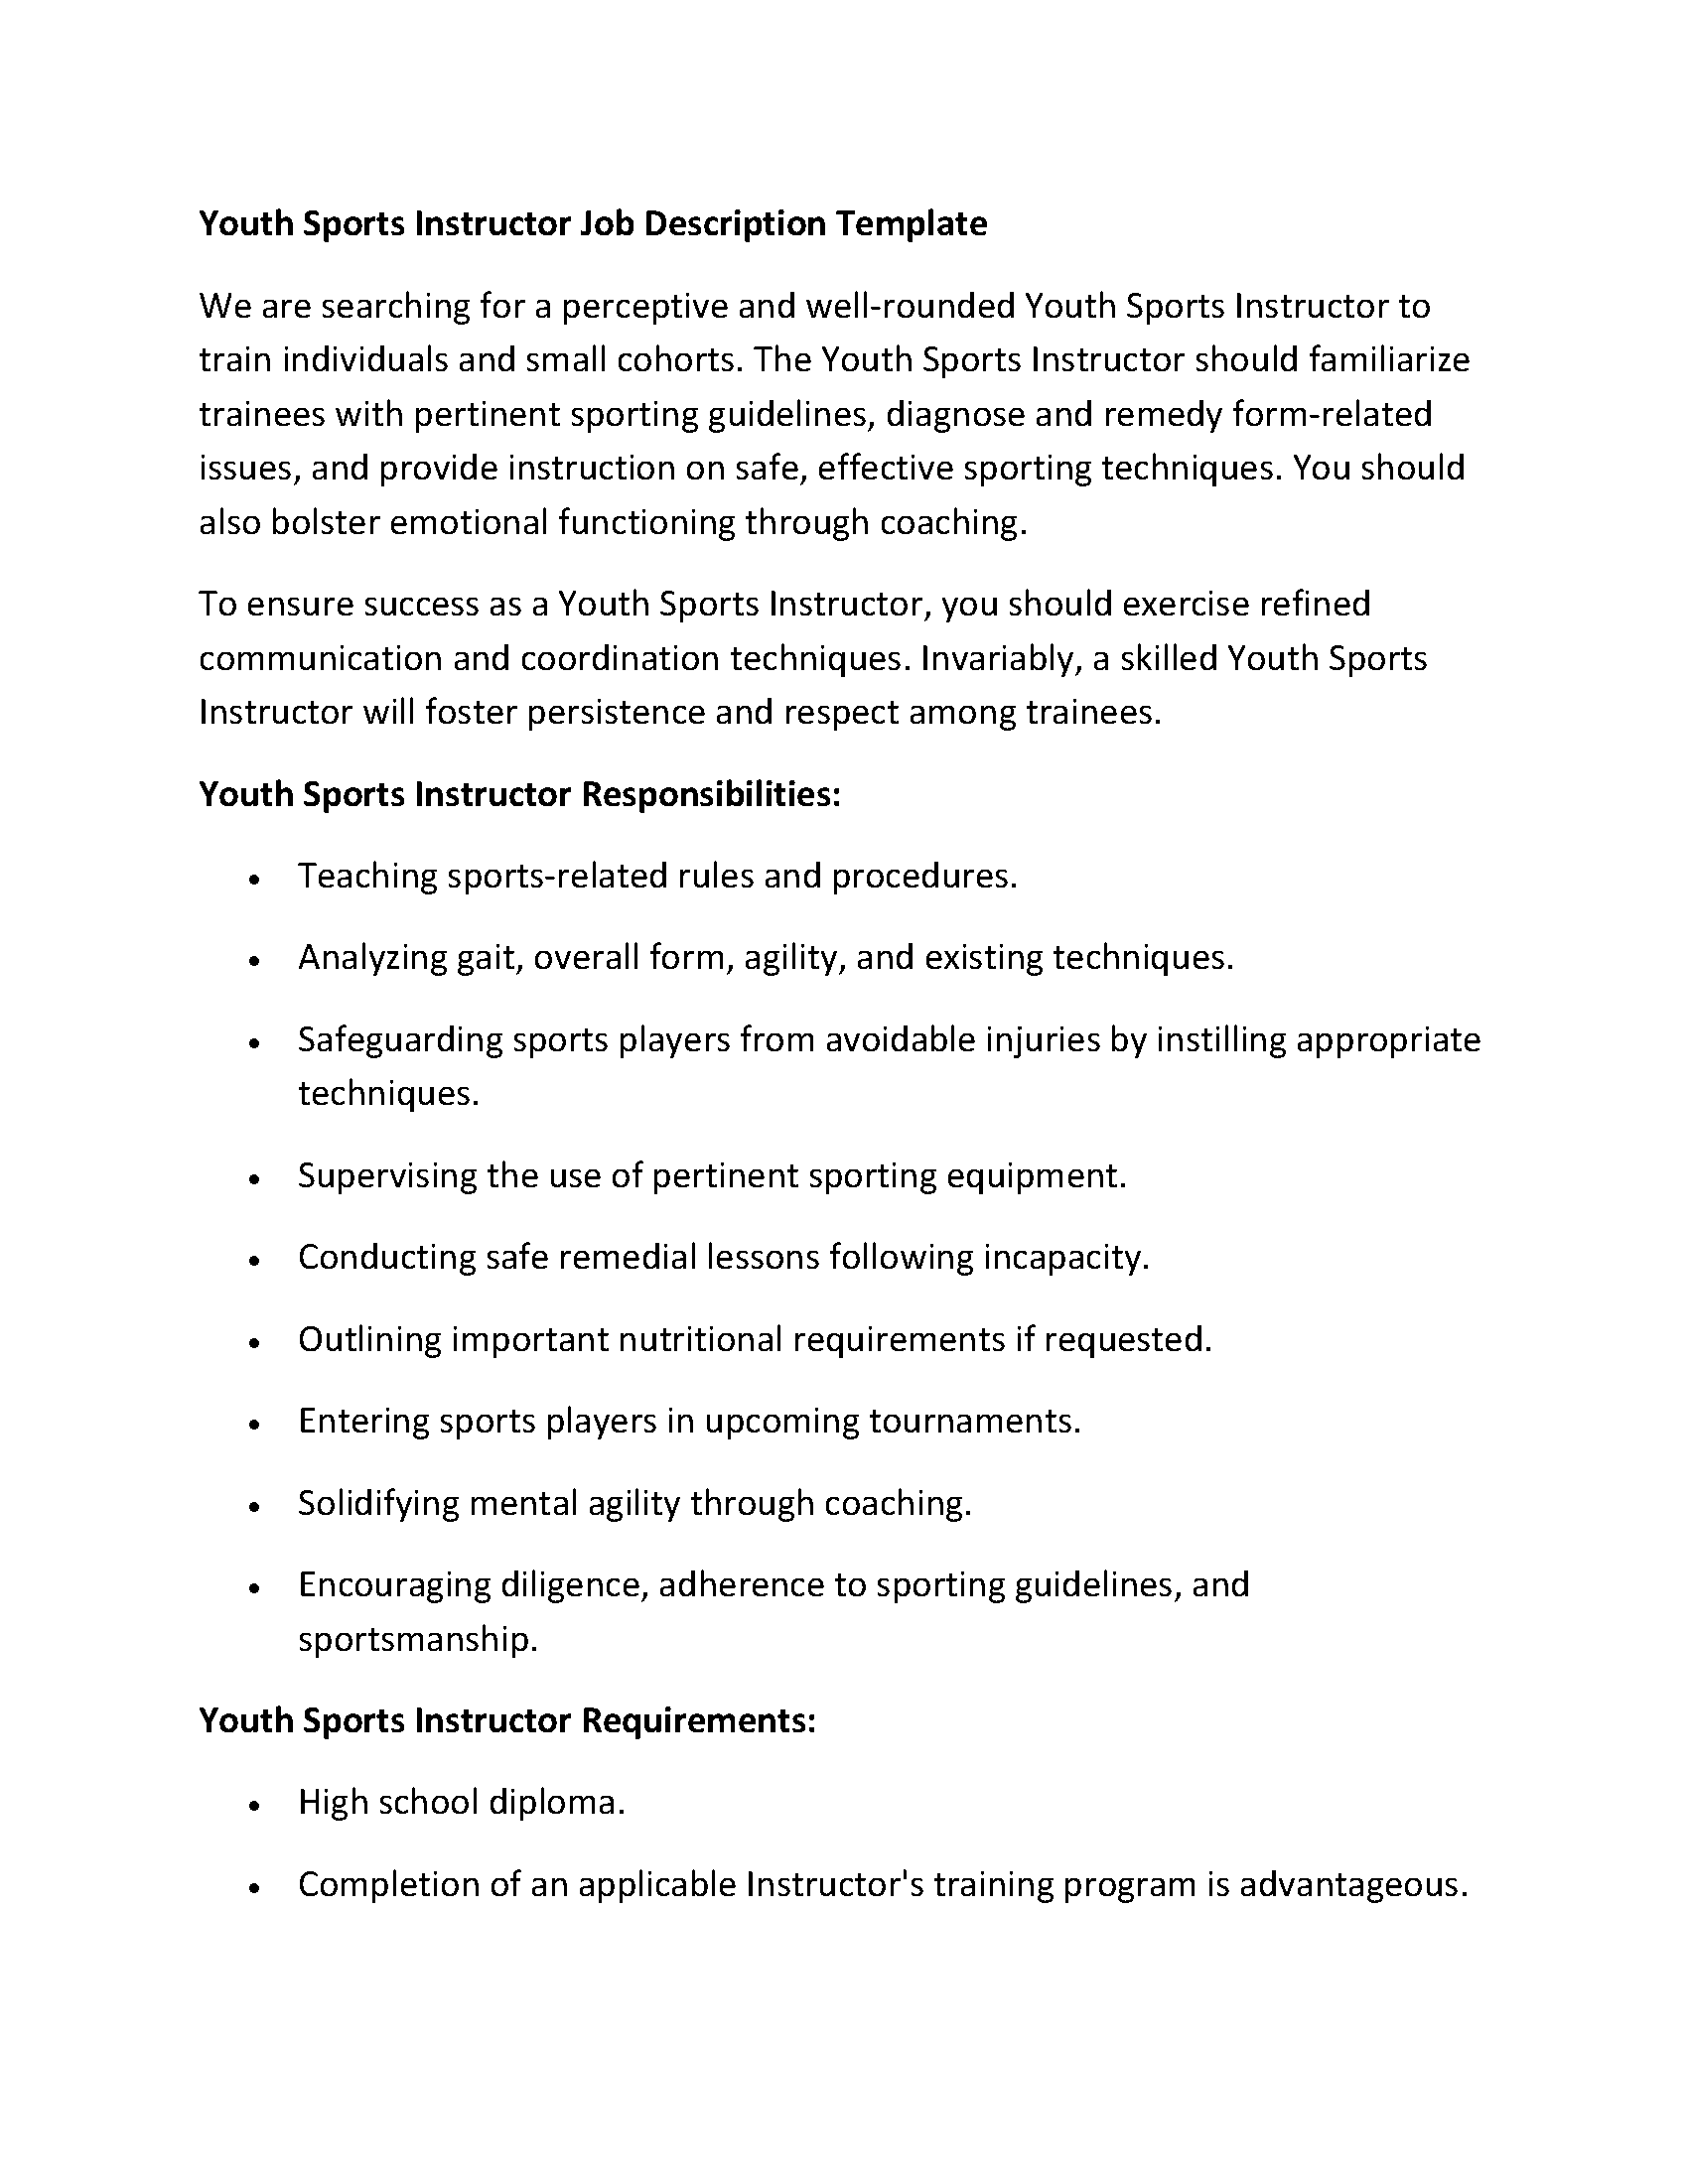 Youth Sports Instructor Job Description Template